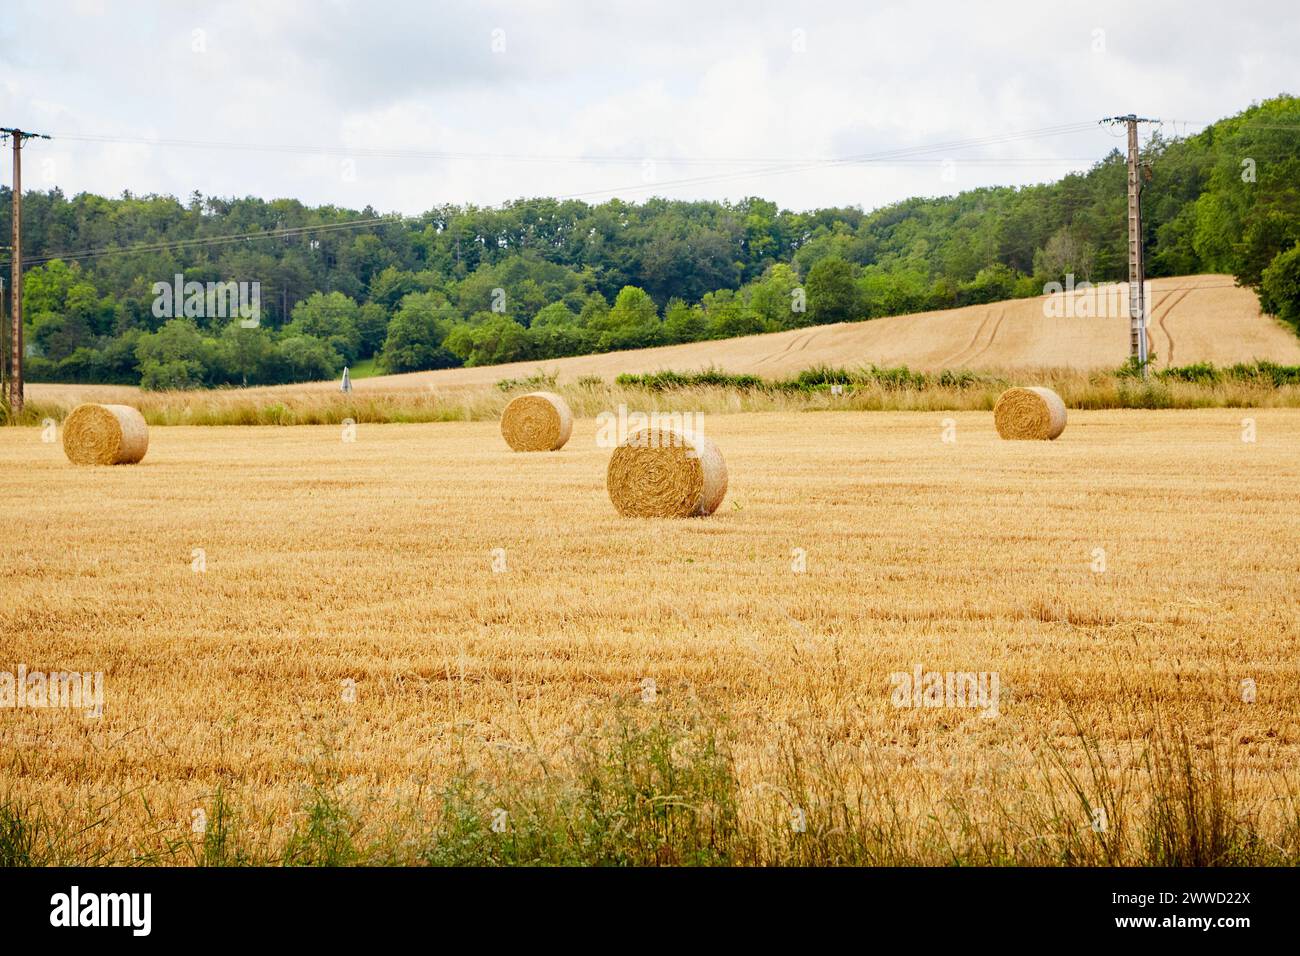 Rolls of Hay in a Field with Telephone Wires Running Through Stock Photo